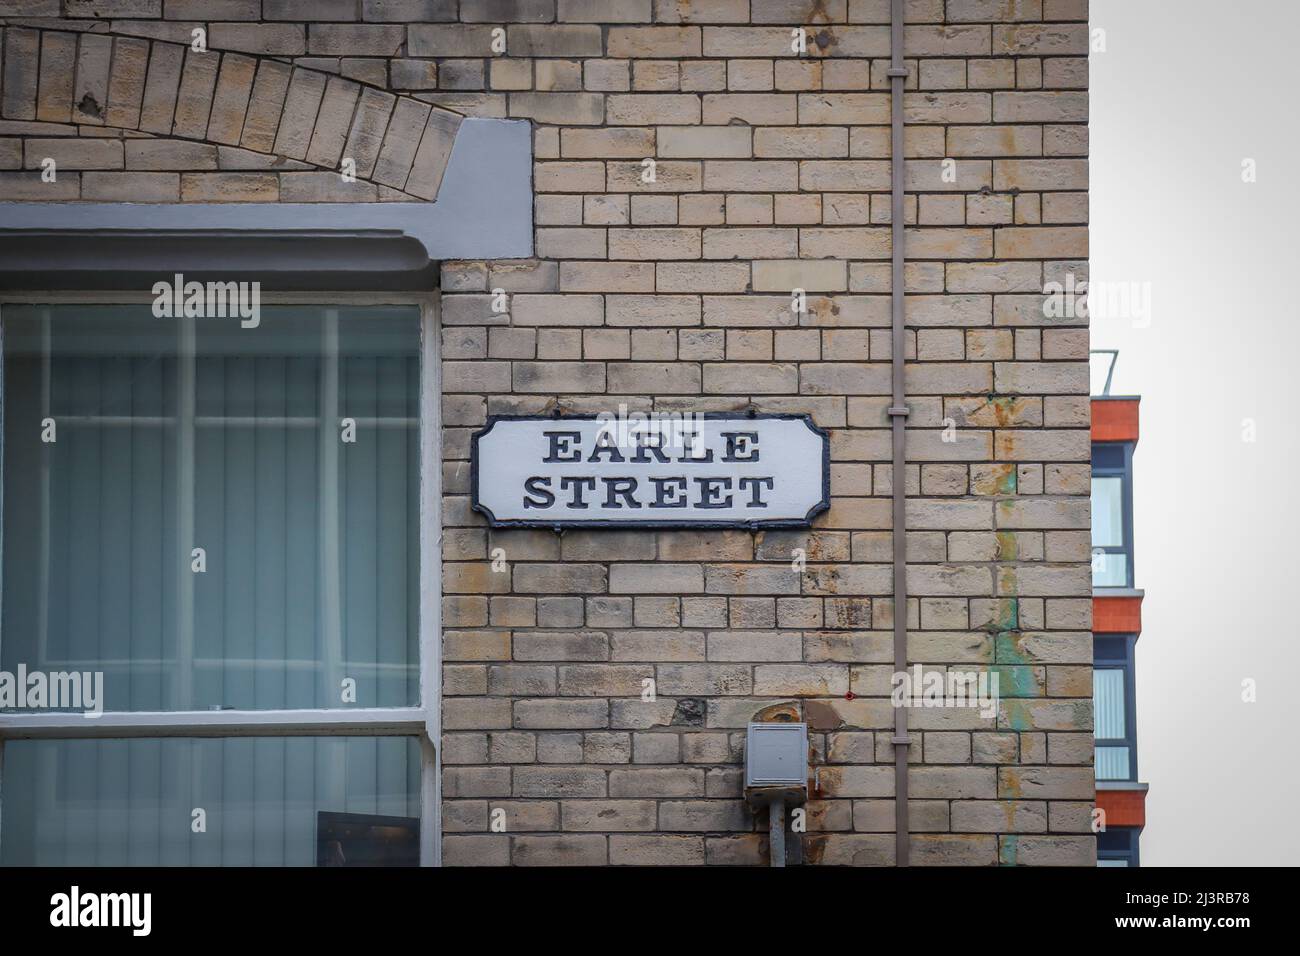 Earle Steet, Liverpool, Street Sign, cuore del Liverpool Cotton Exchange Foto Stock